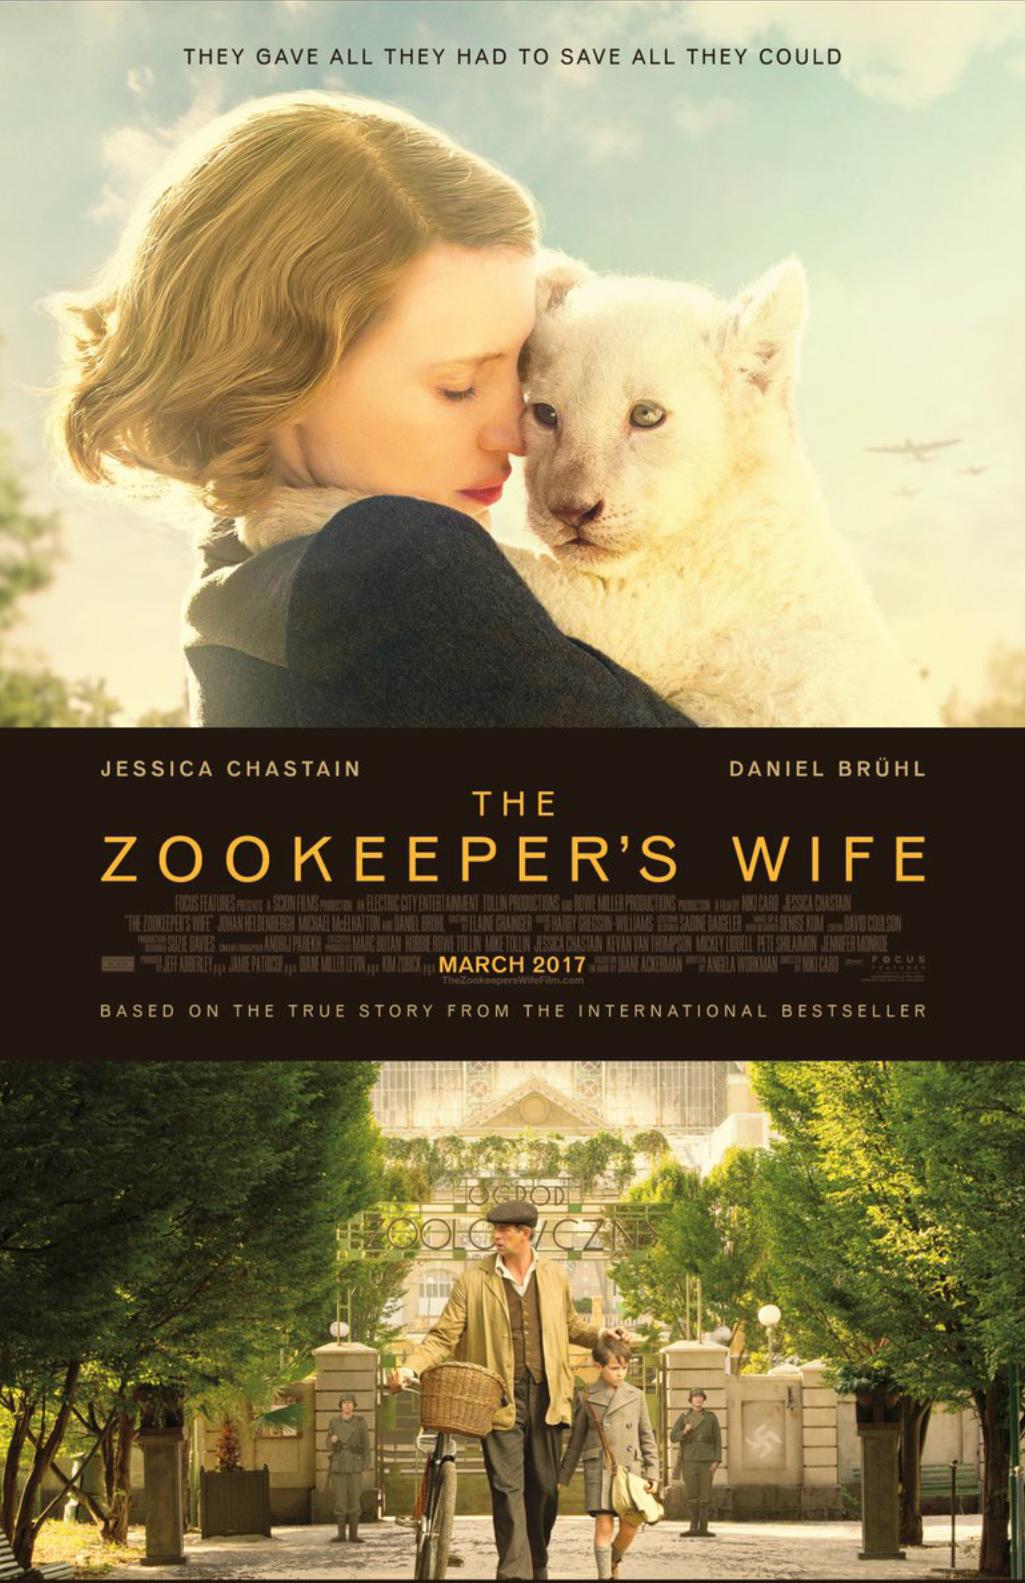 Cover Art for "The Zookeeper's Wife"